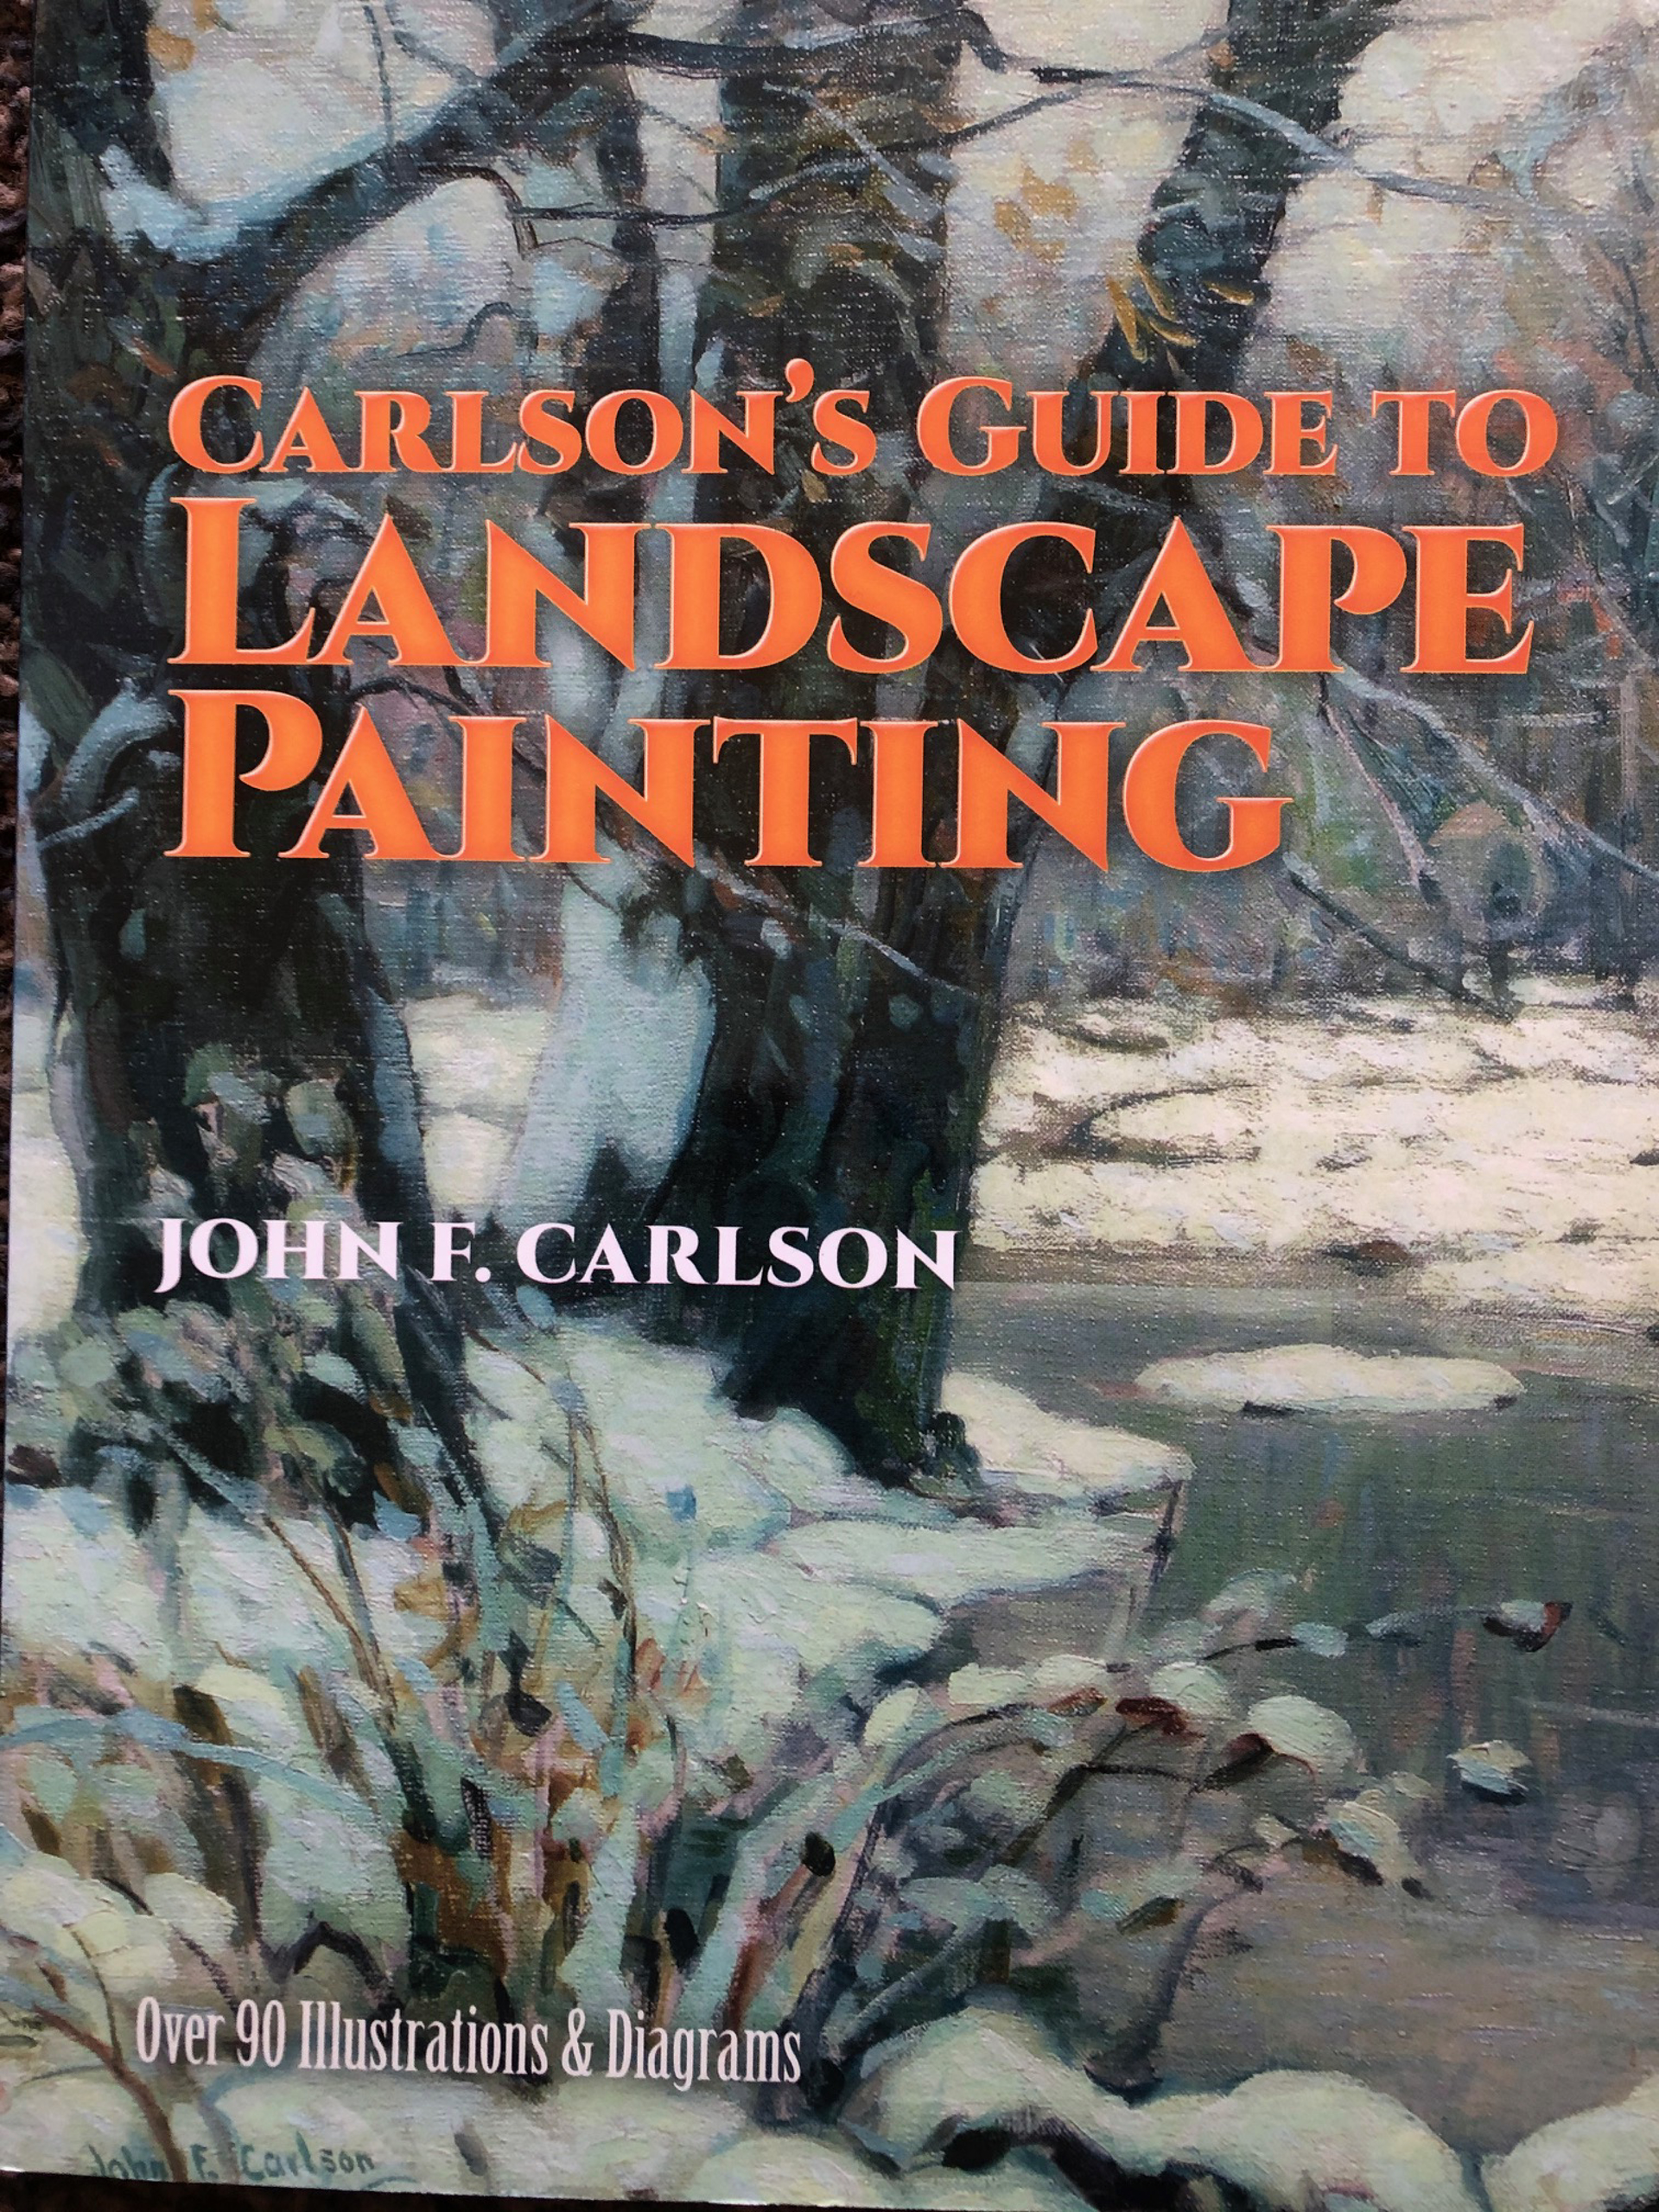 Carlson's Guide to Landscape Painting by John F. Carlson